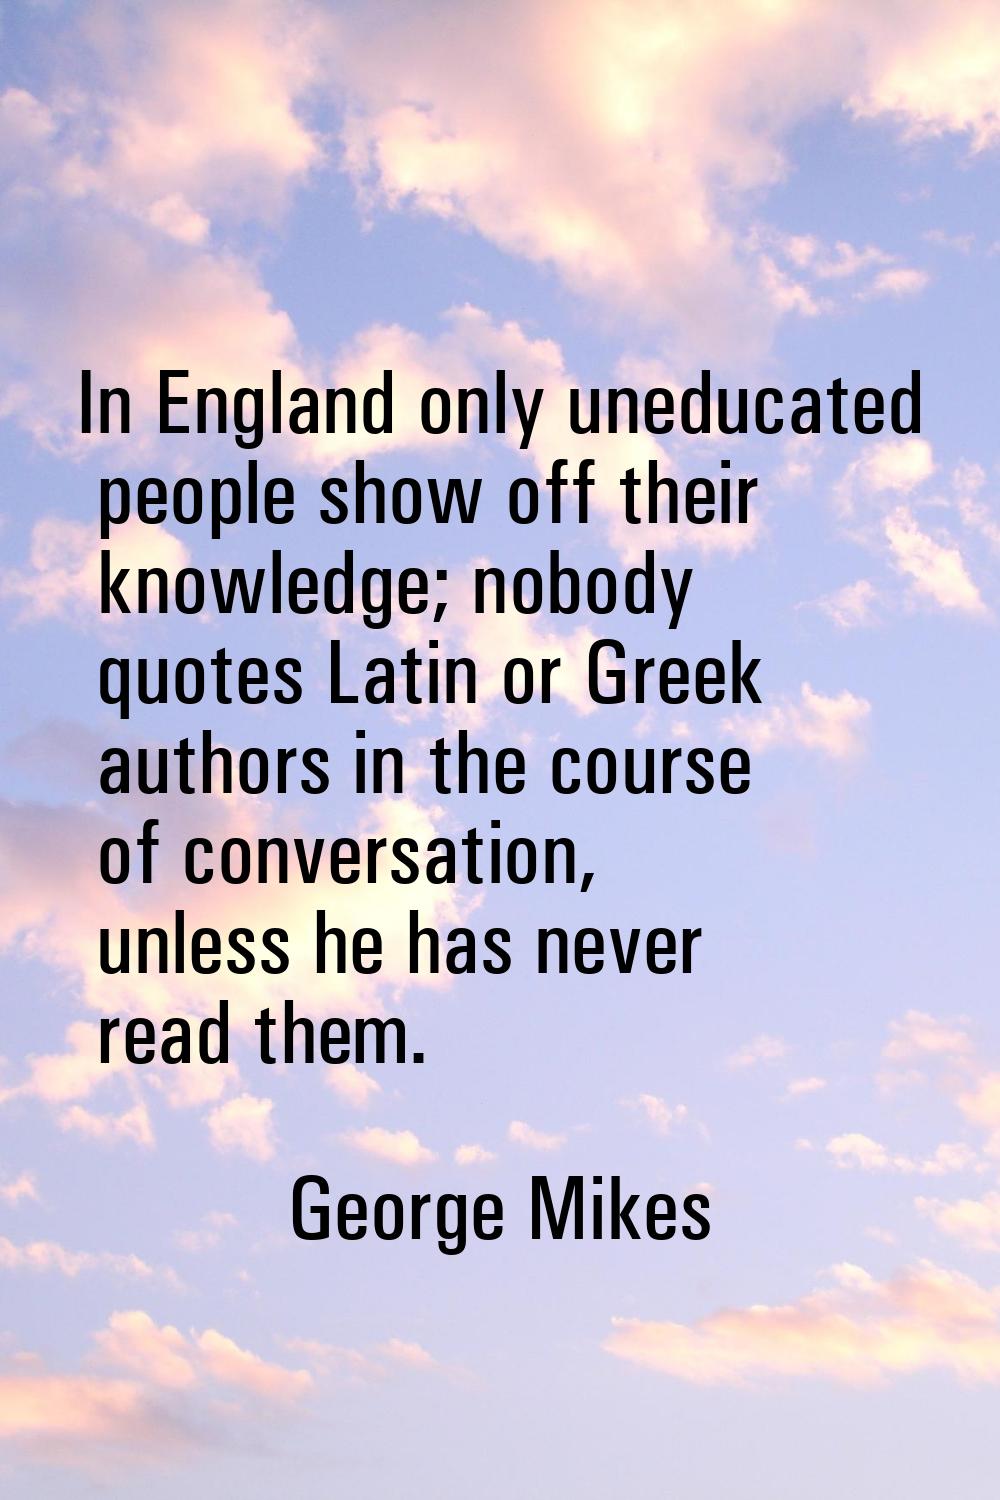 In England only uneducated people show off their knowledge; nobody quotes Latin or Greek authors in